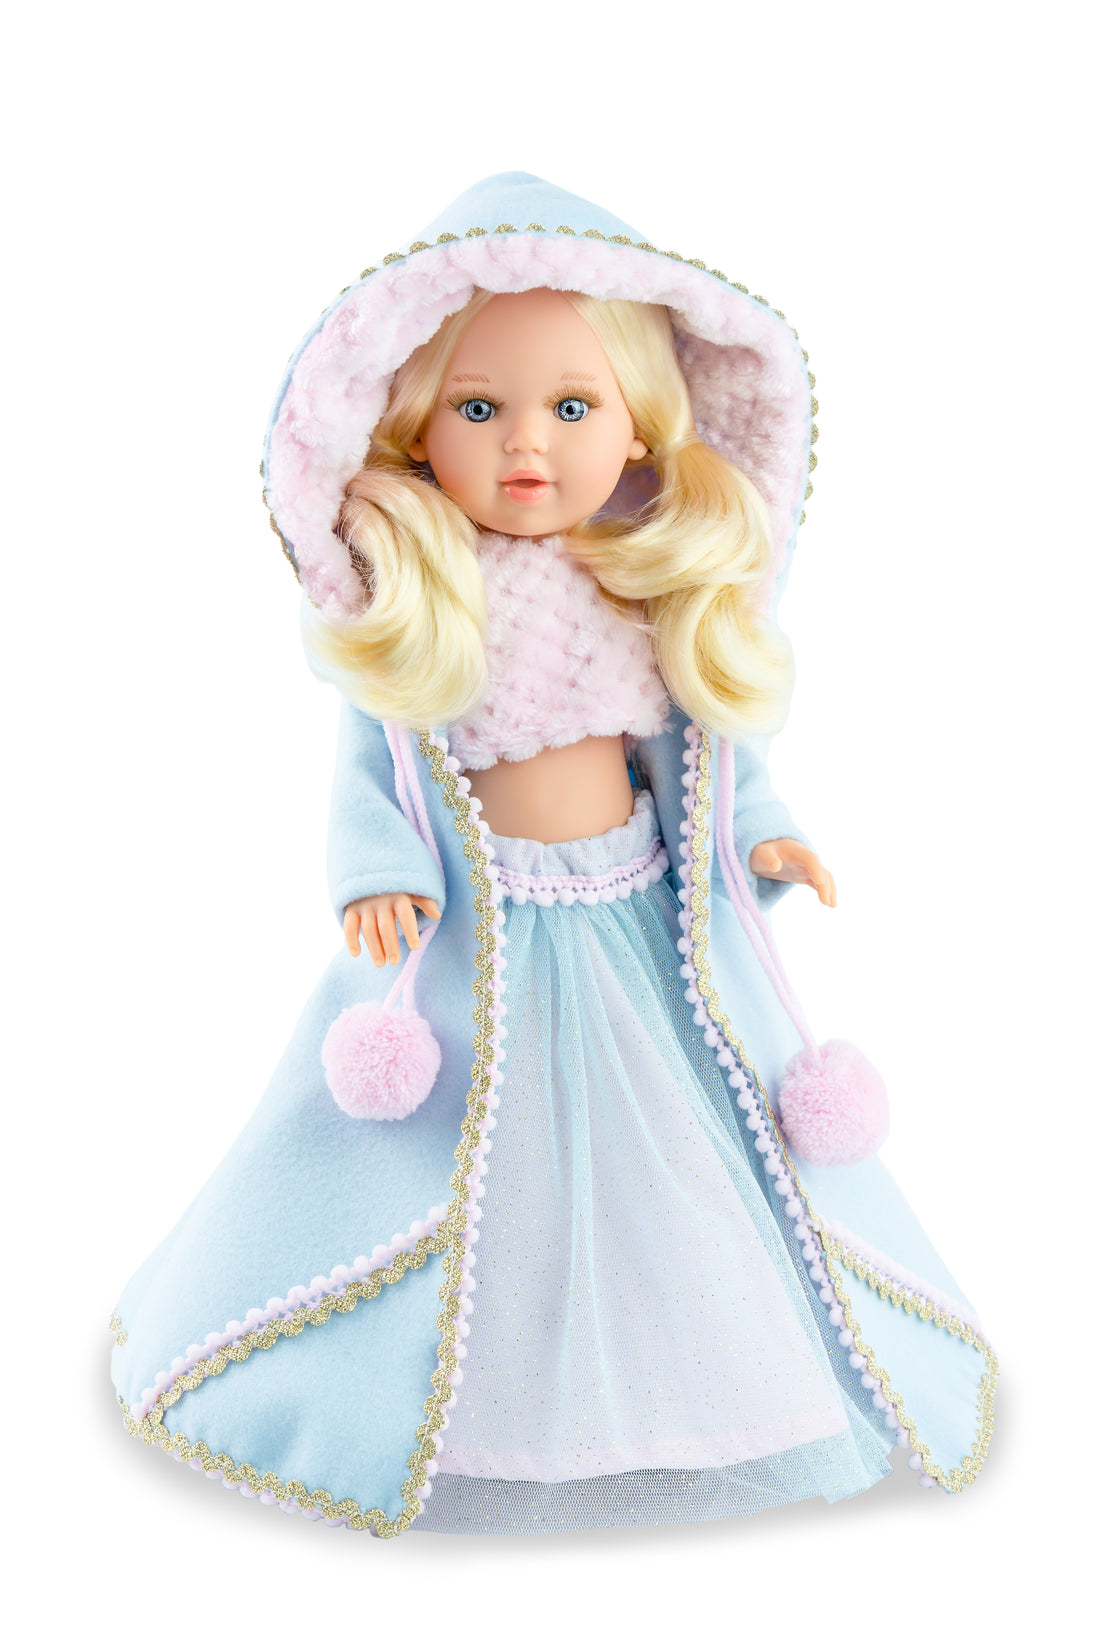 Marina Edelweiss Doll - Dolls and Accessories